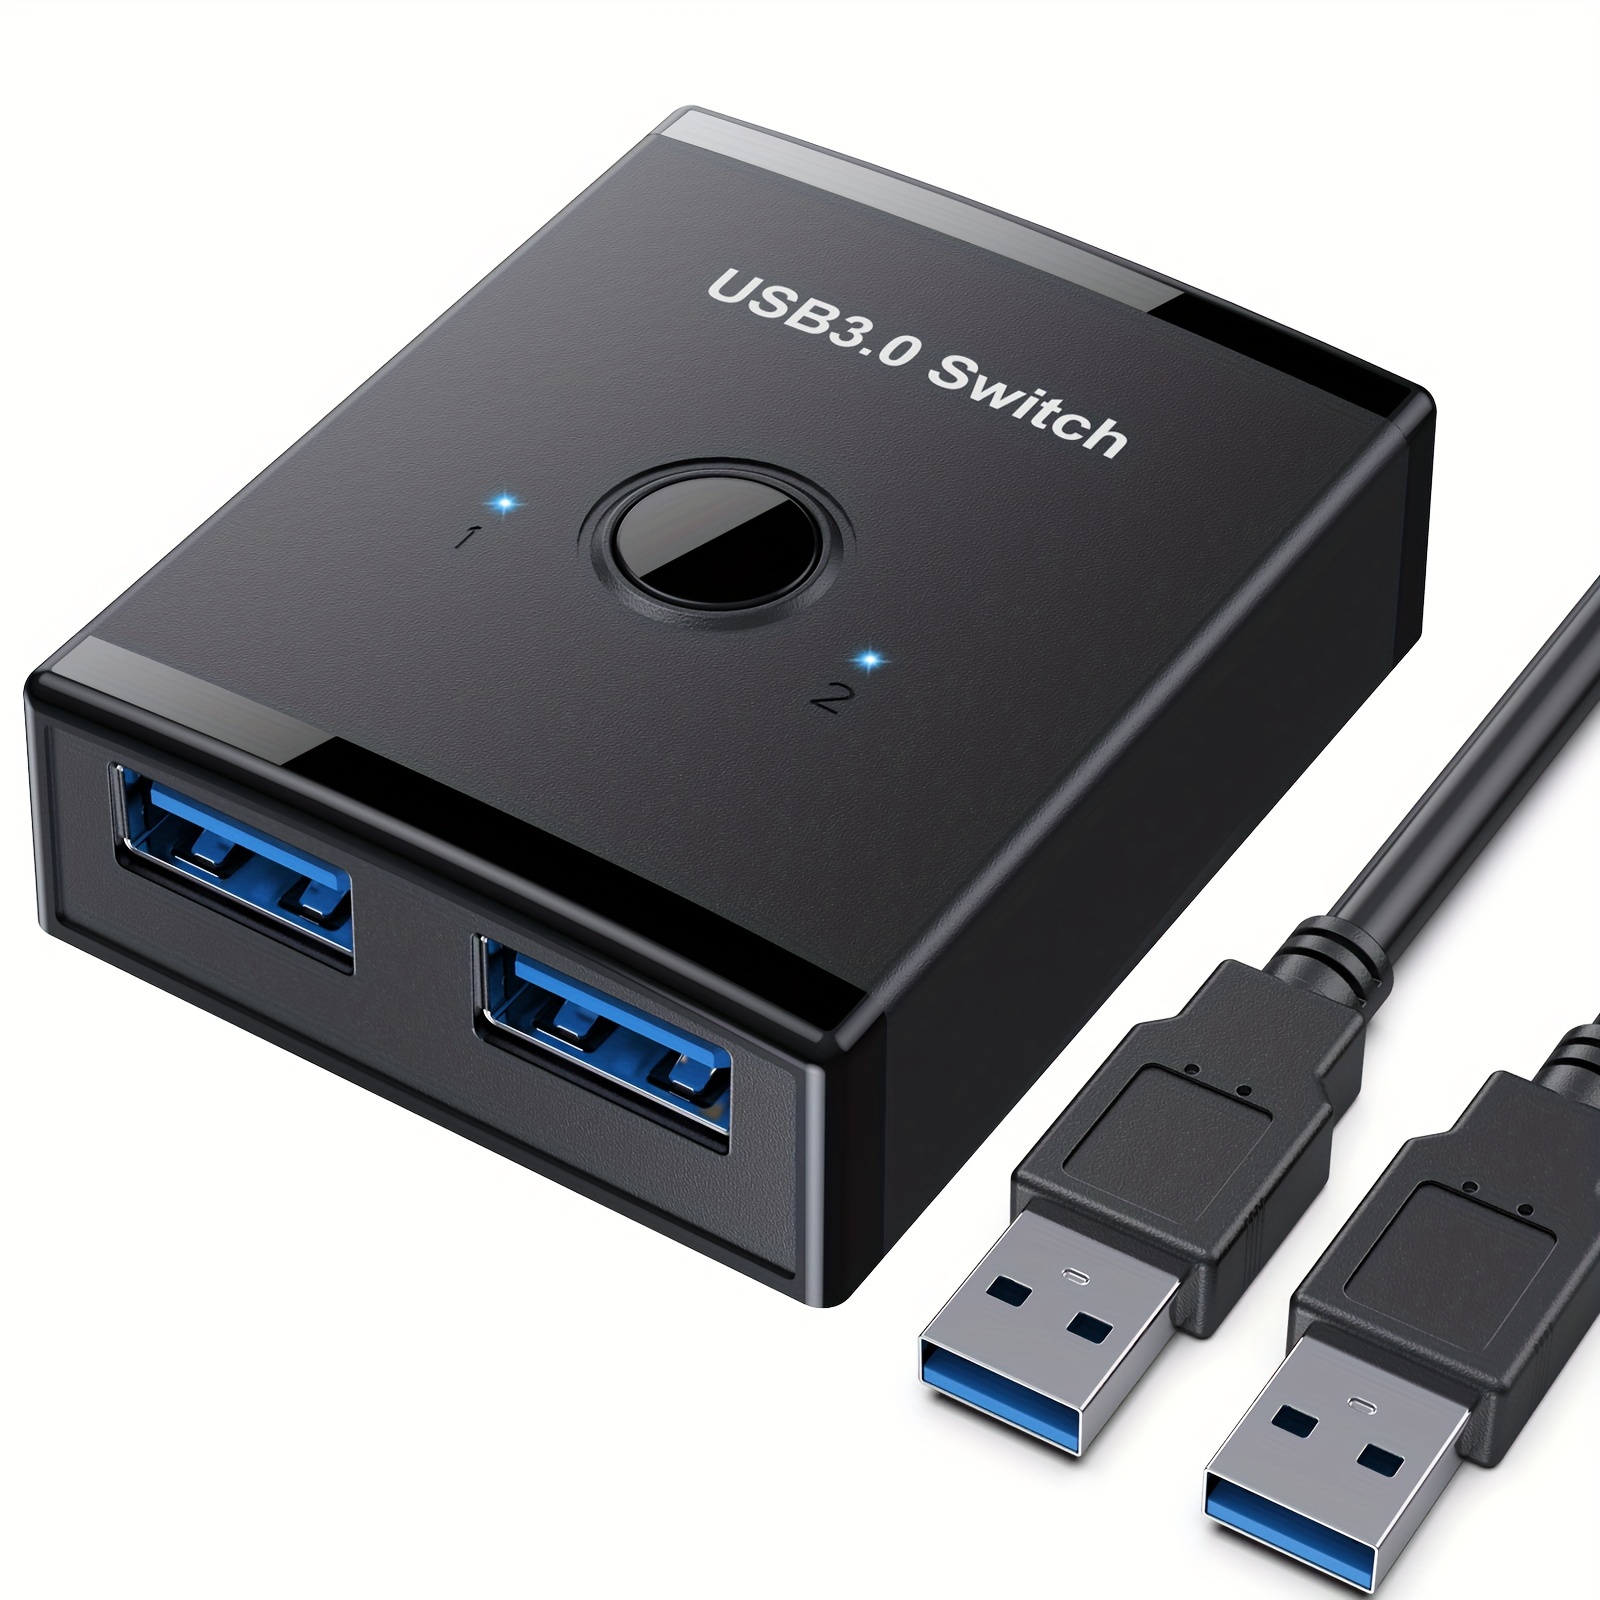 USB 3.0 Switch, USB Switch 4 Computers Sharing 4 USB Peripherals, USB  Switch Selector Support Button or Wireless Remote Control Switching,  Includes 4